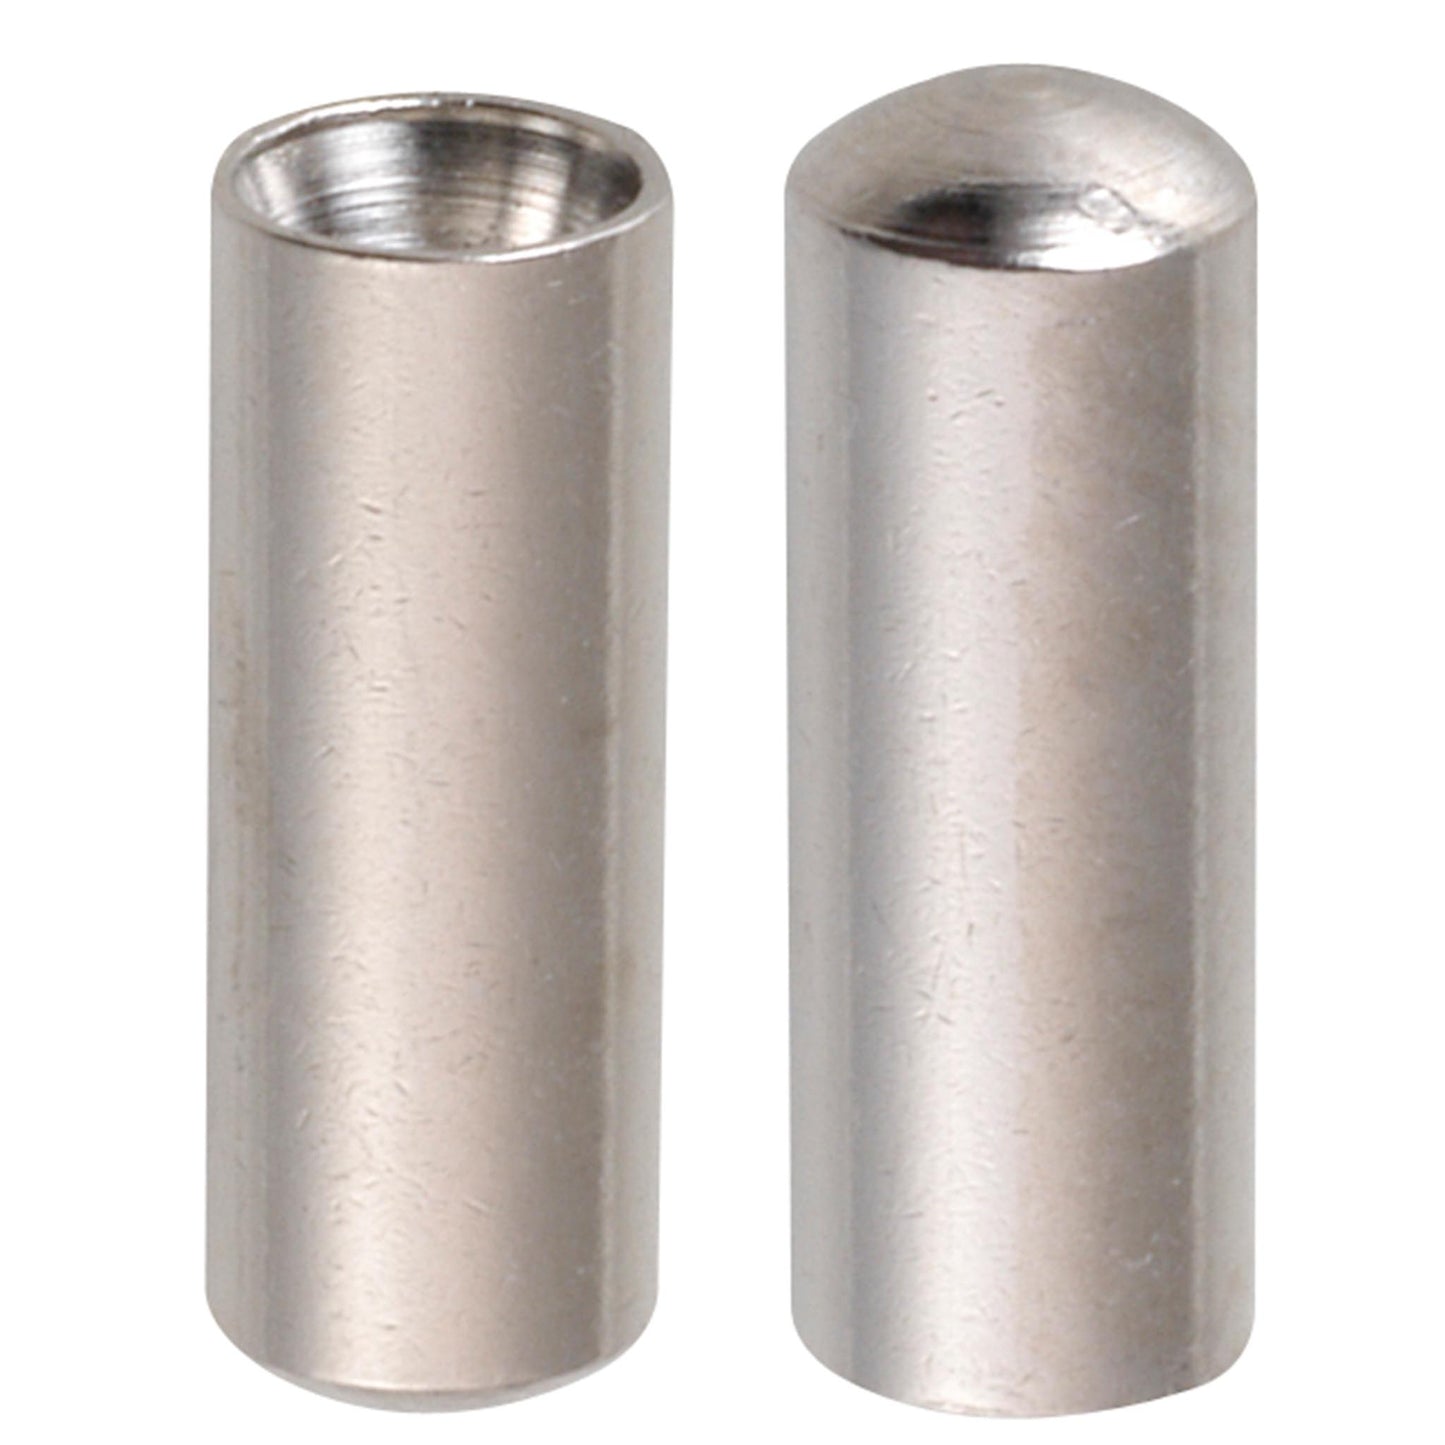 End sleeve 10 nickel-plated brass